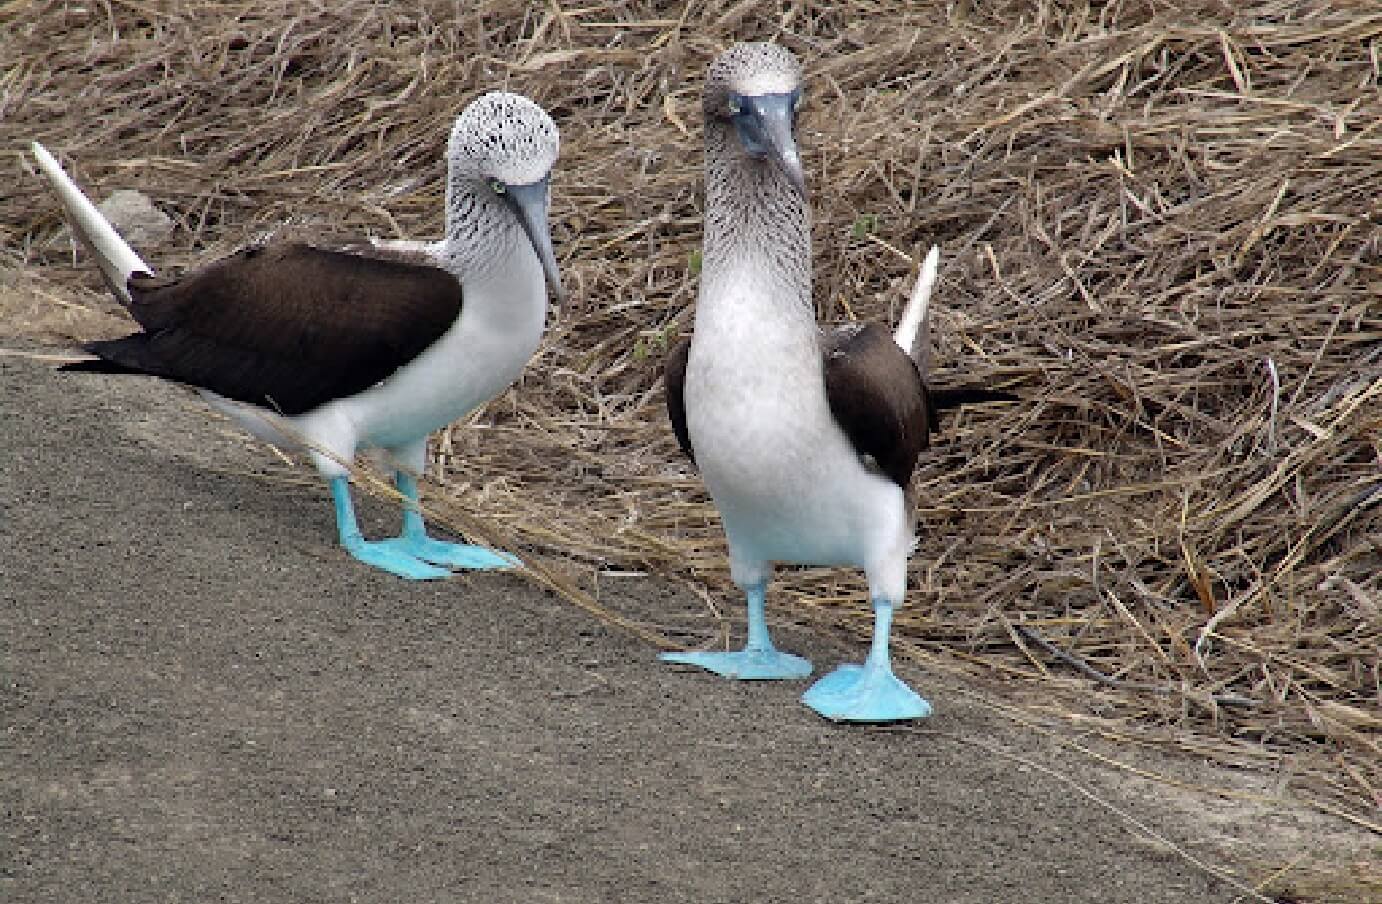 Two Blue-Footed Booby birds standing next to each other